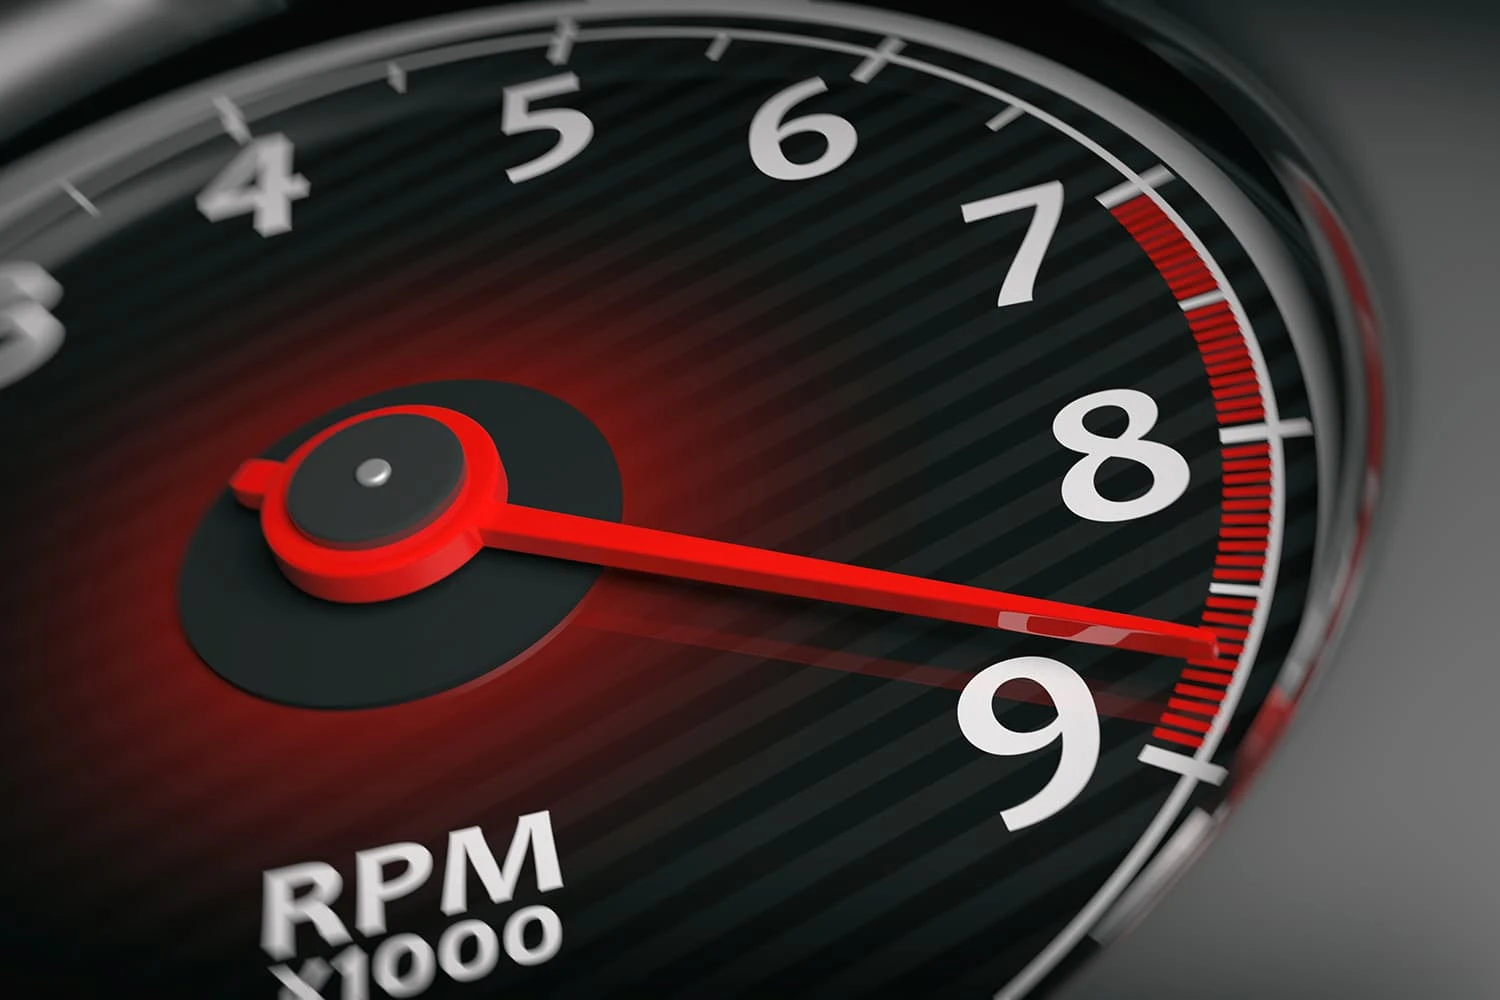 An RPM meter on max.